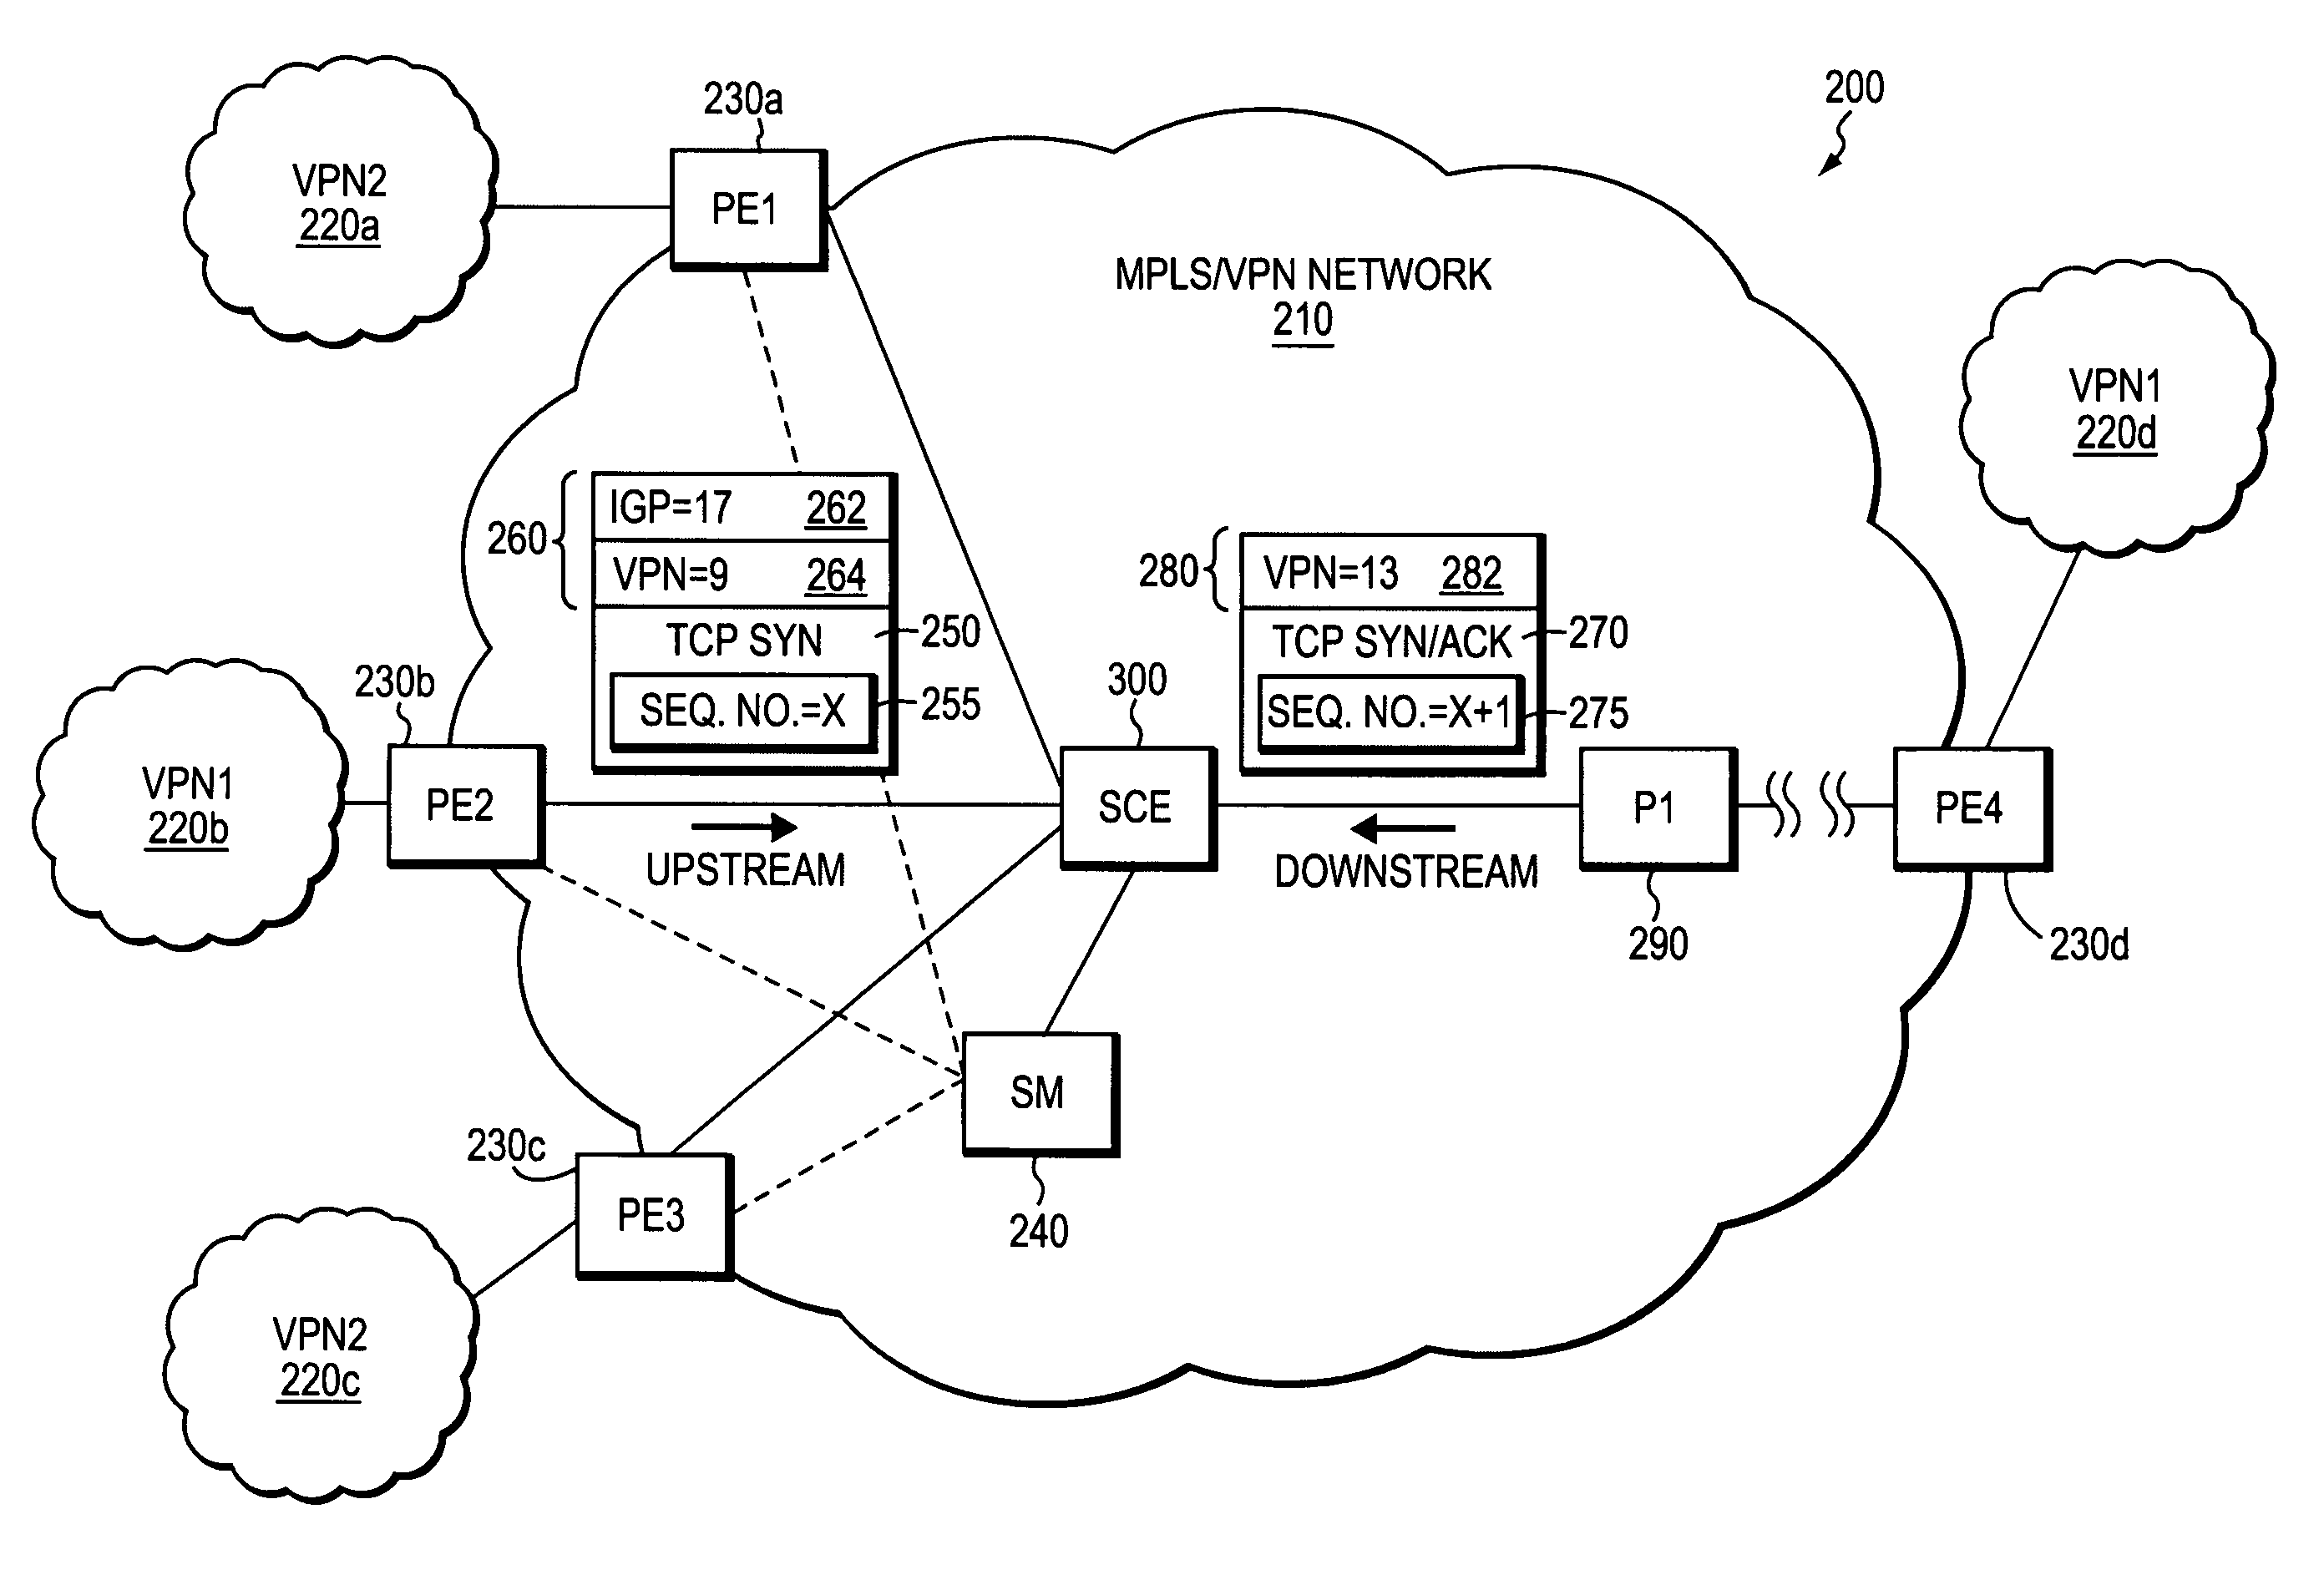 Method and apparatus for self-learning of VPNS from combination of unidirectional tunnels in MPLS/VPN networks